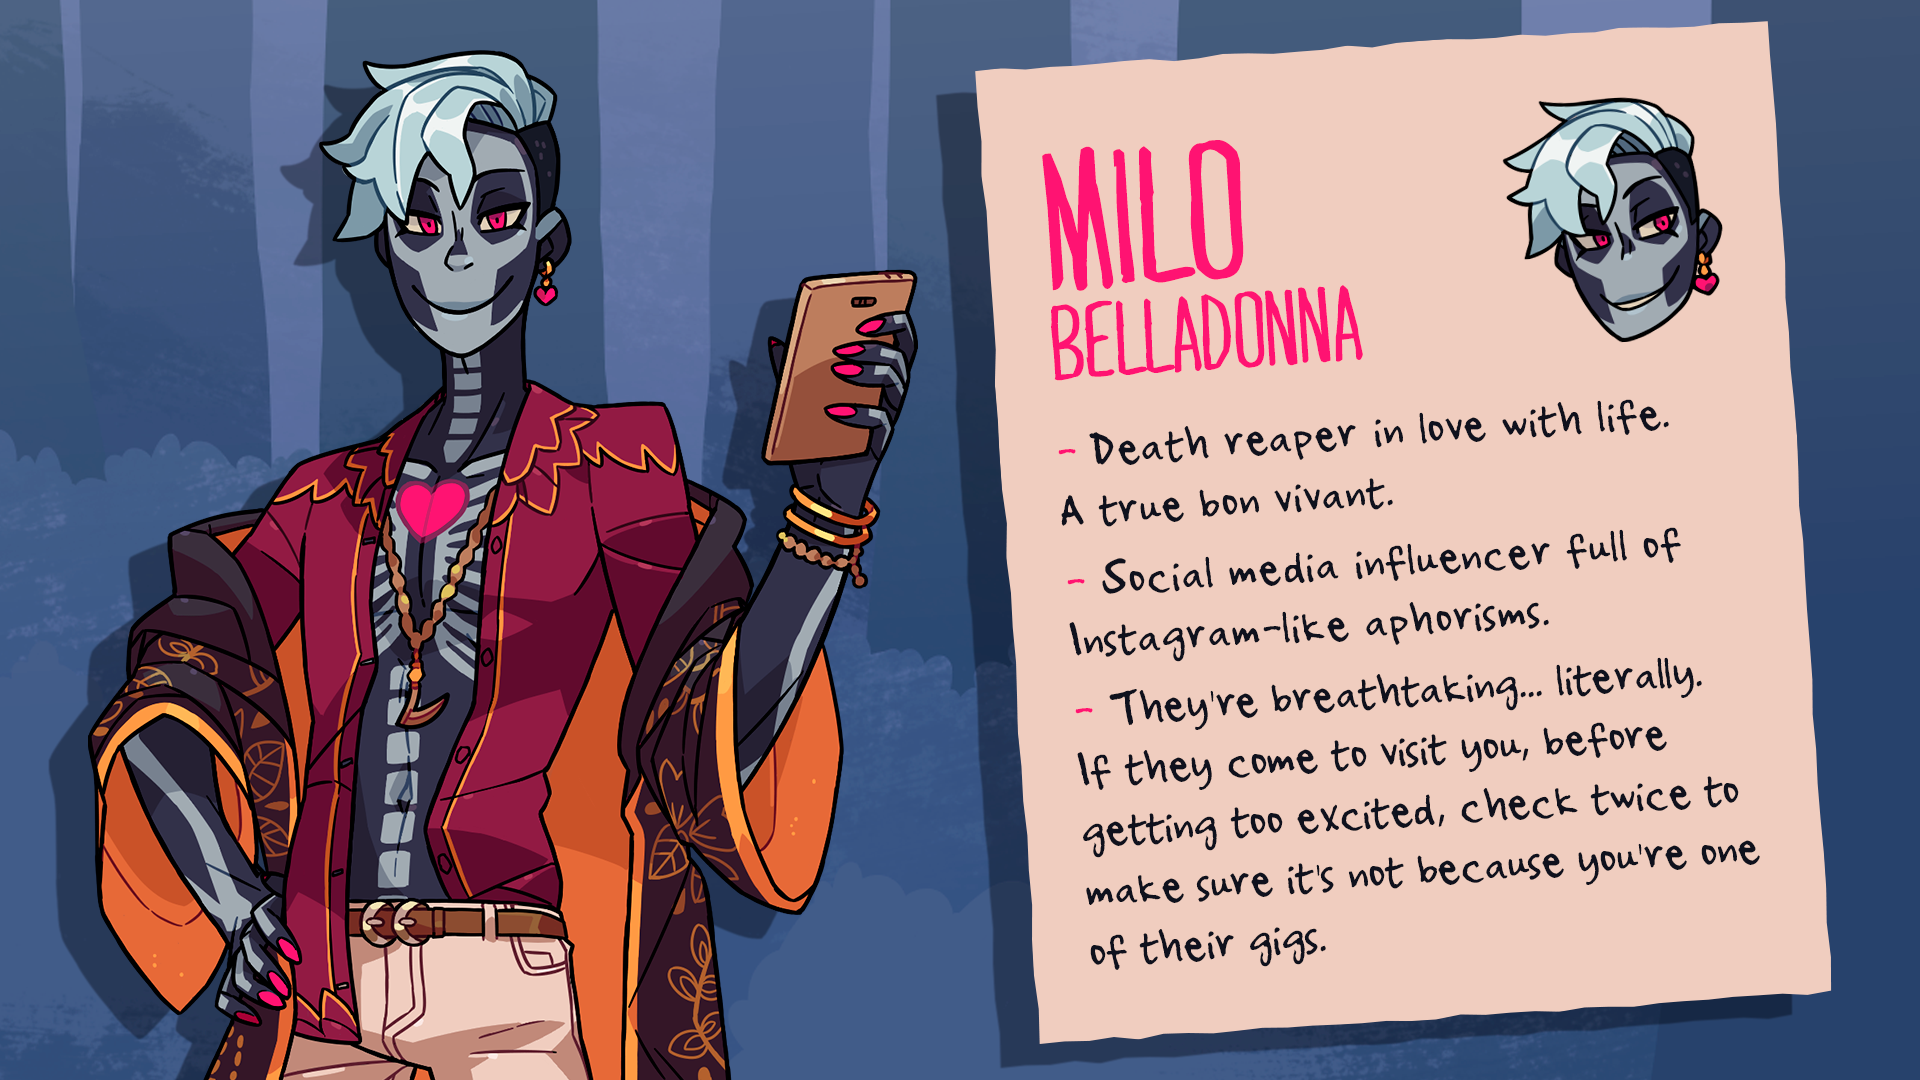 Milos character bio displayed in a small bio next to him. He is smiling and holding his phone.